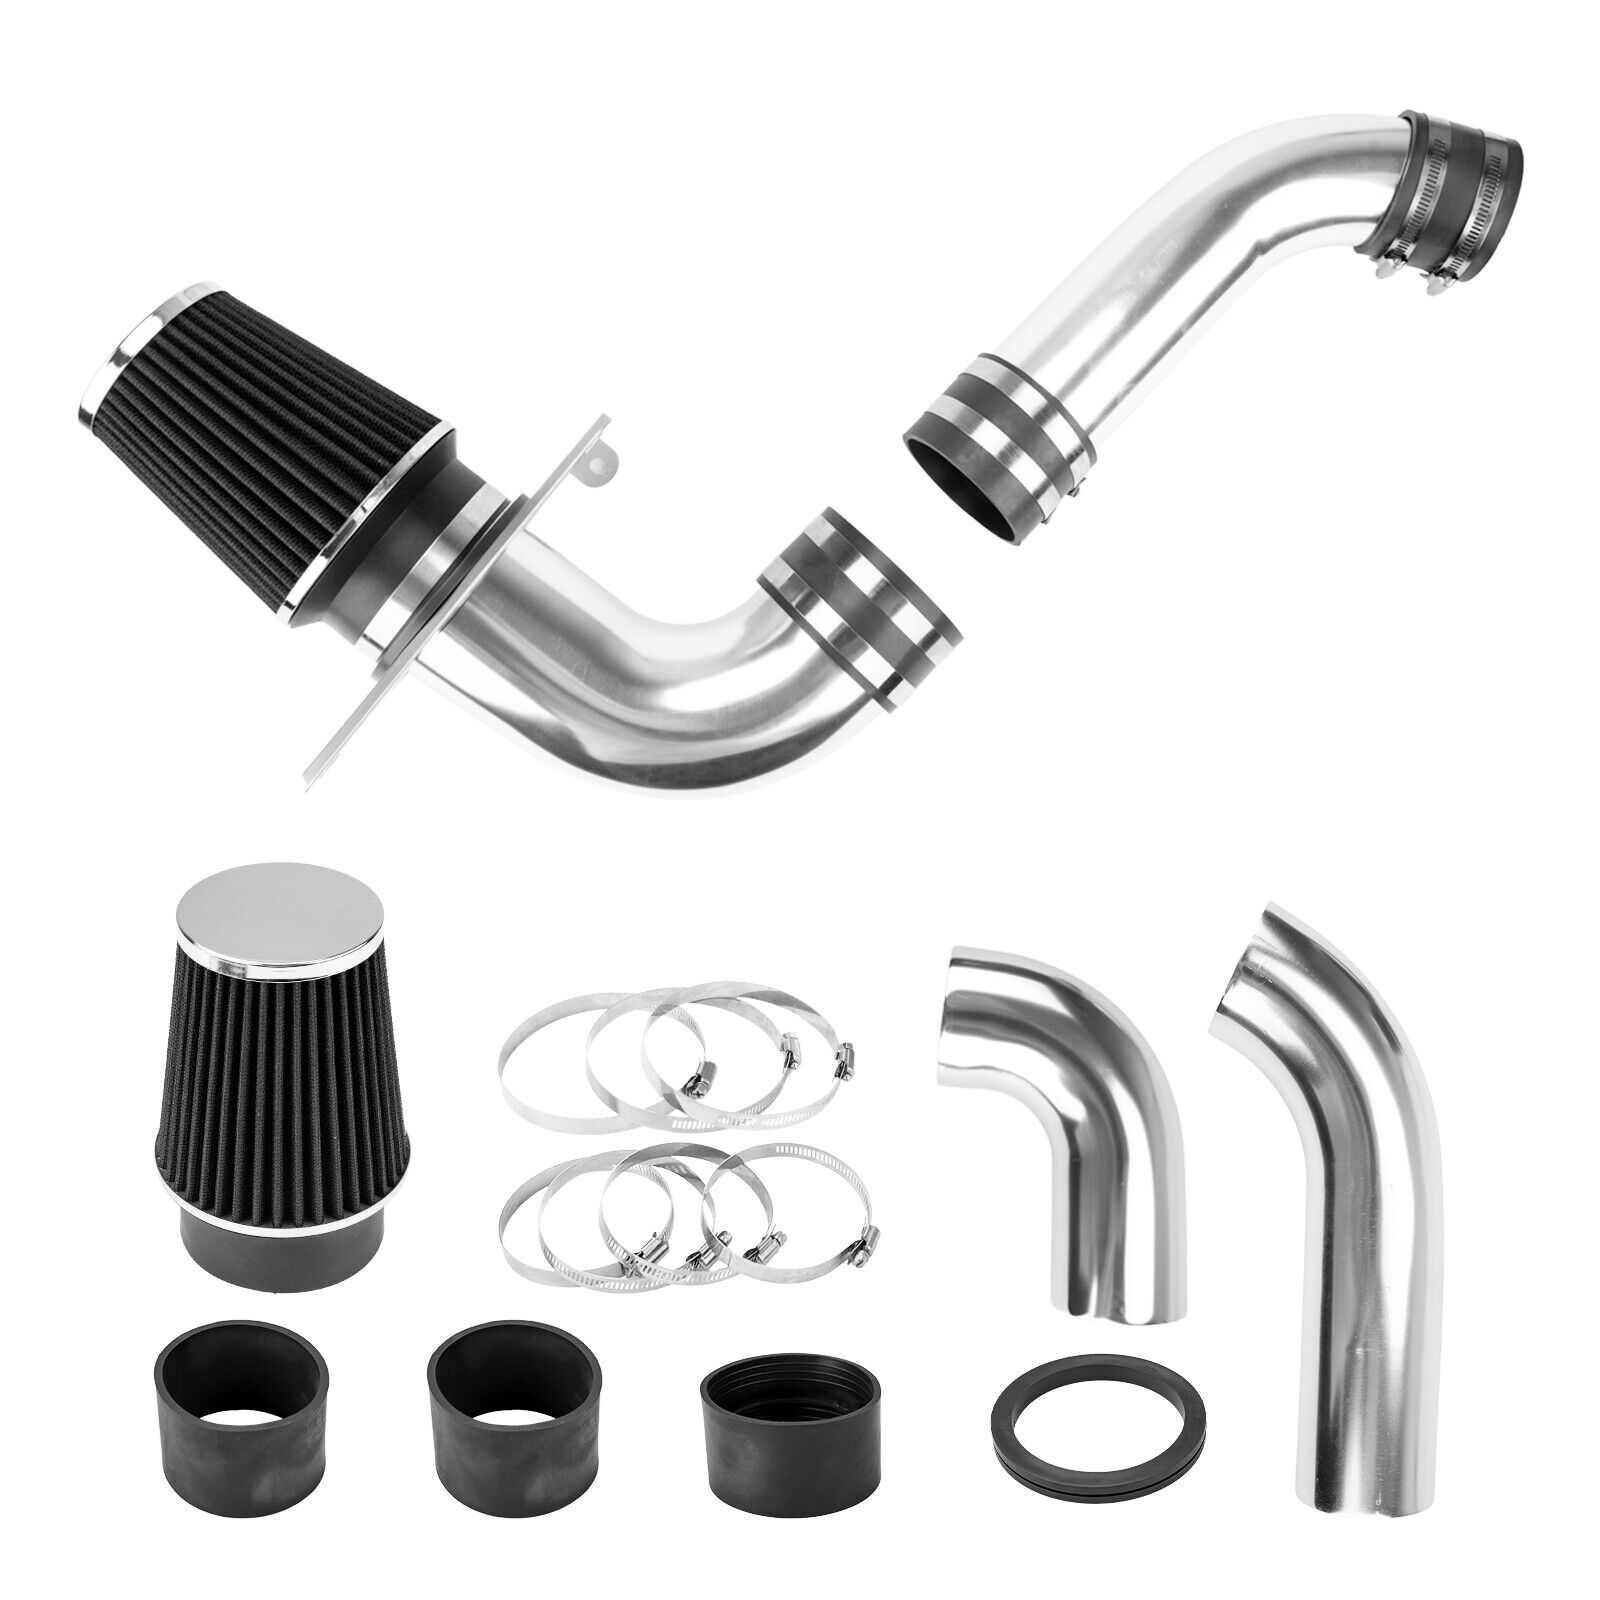 Cold Air Intake Kit + Black Filter For 1989-1993 Ford Mustang GT LX 5.0L V8